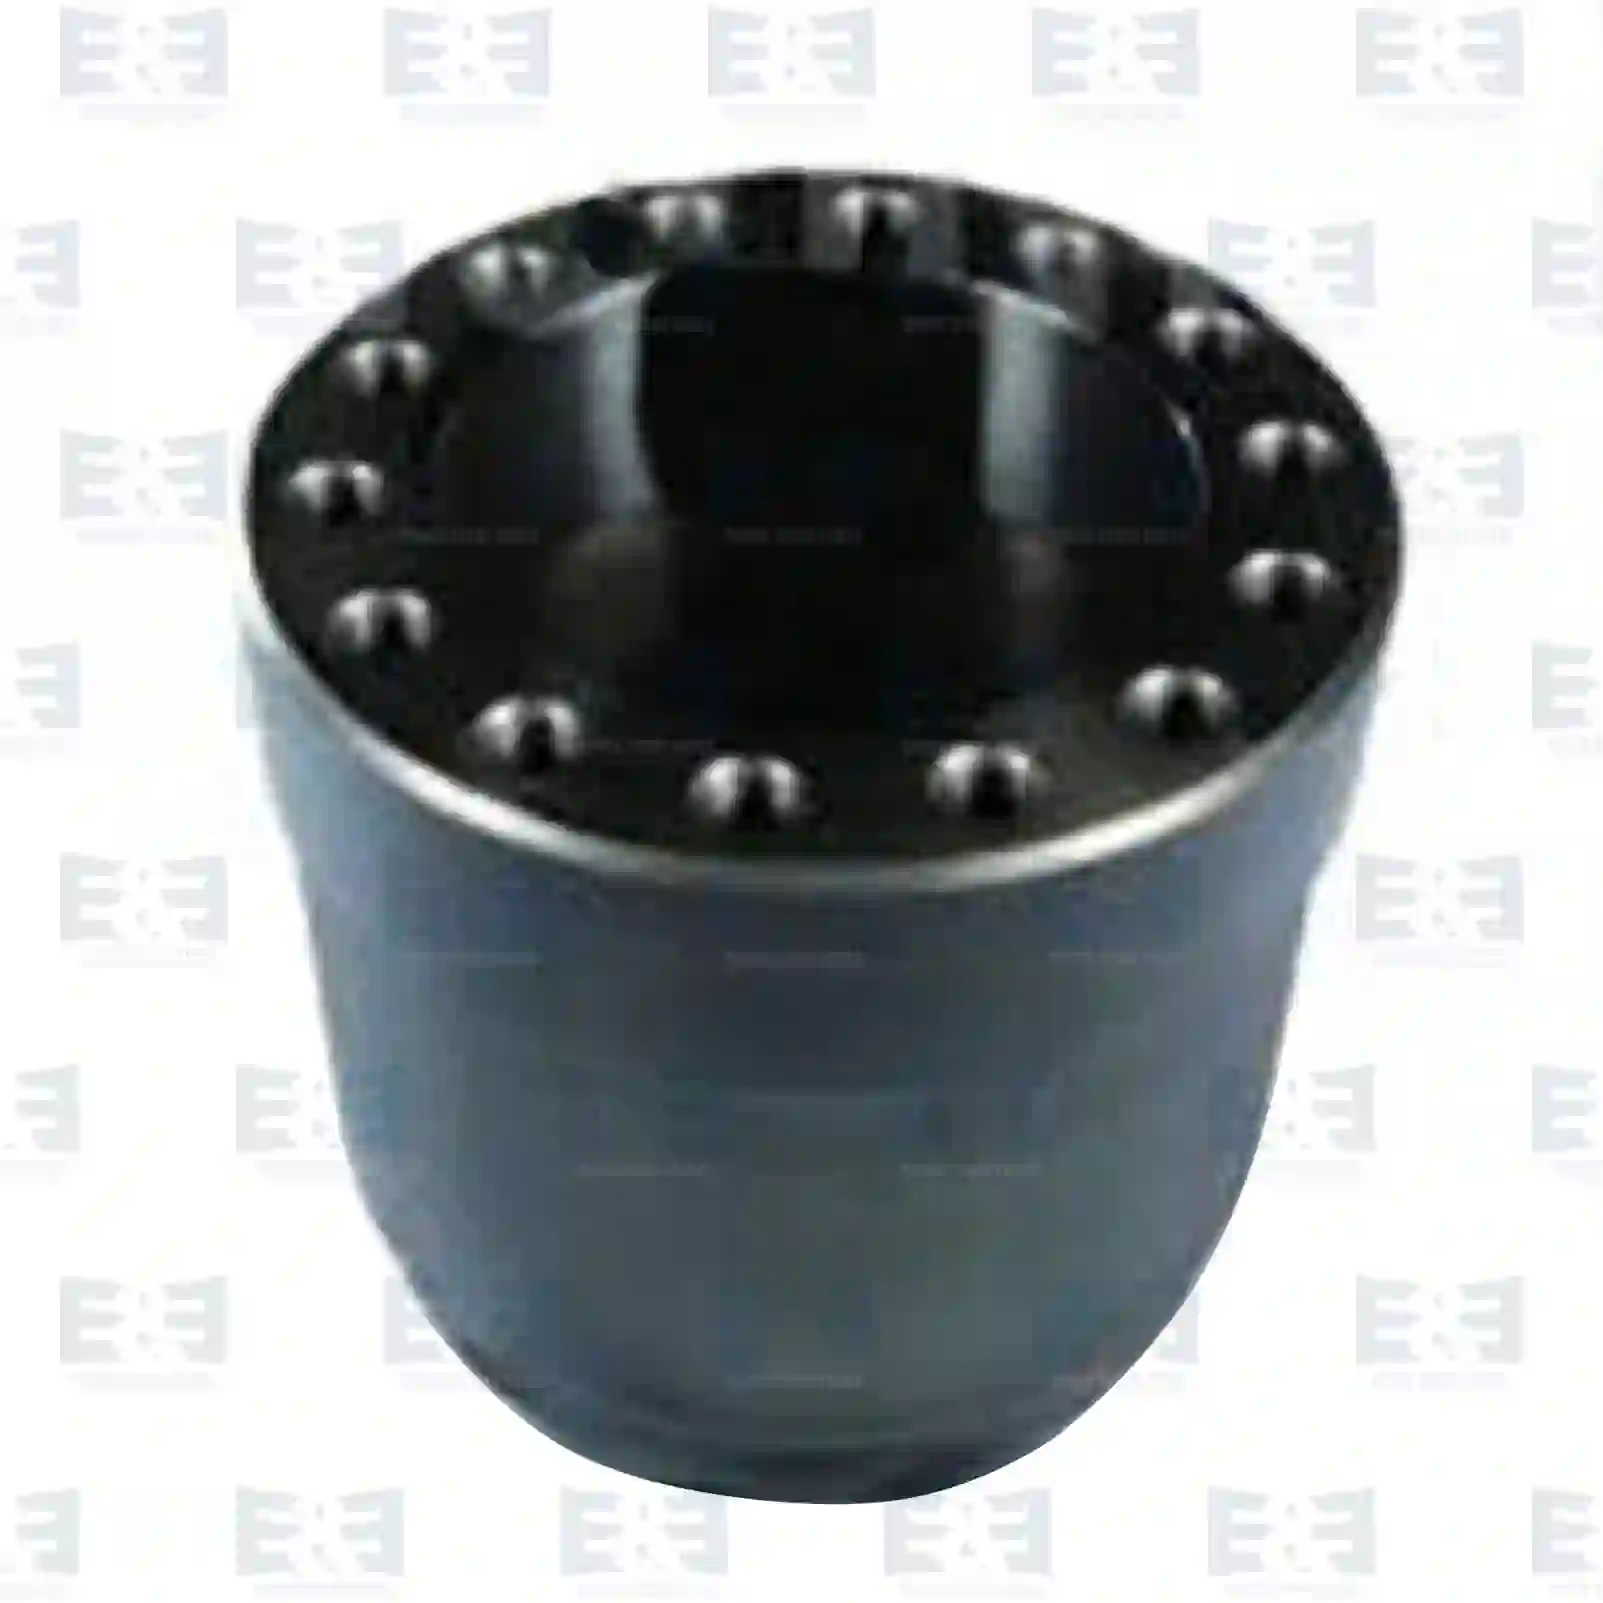 Wheel hub, with bearing, without ABS ring, 2E2284993, 9753300425, 9753300825, , , , , , ||  2E2284993 E&E Truck Spare Parts | Truck Spare Parts, Auotomotive Spare Parts Wheel hub, with bearing, without ABS ring, 2E2284993, 9753300425, 9753300825, , , , , , ||  2E2284993 E&E Truck Spare Parts | Truck Spare Parts, Auotomotive Spare Parts